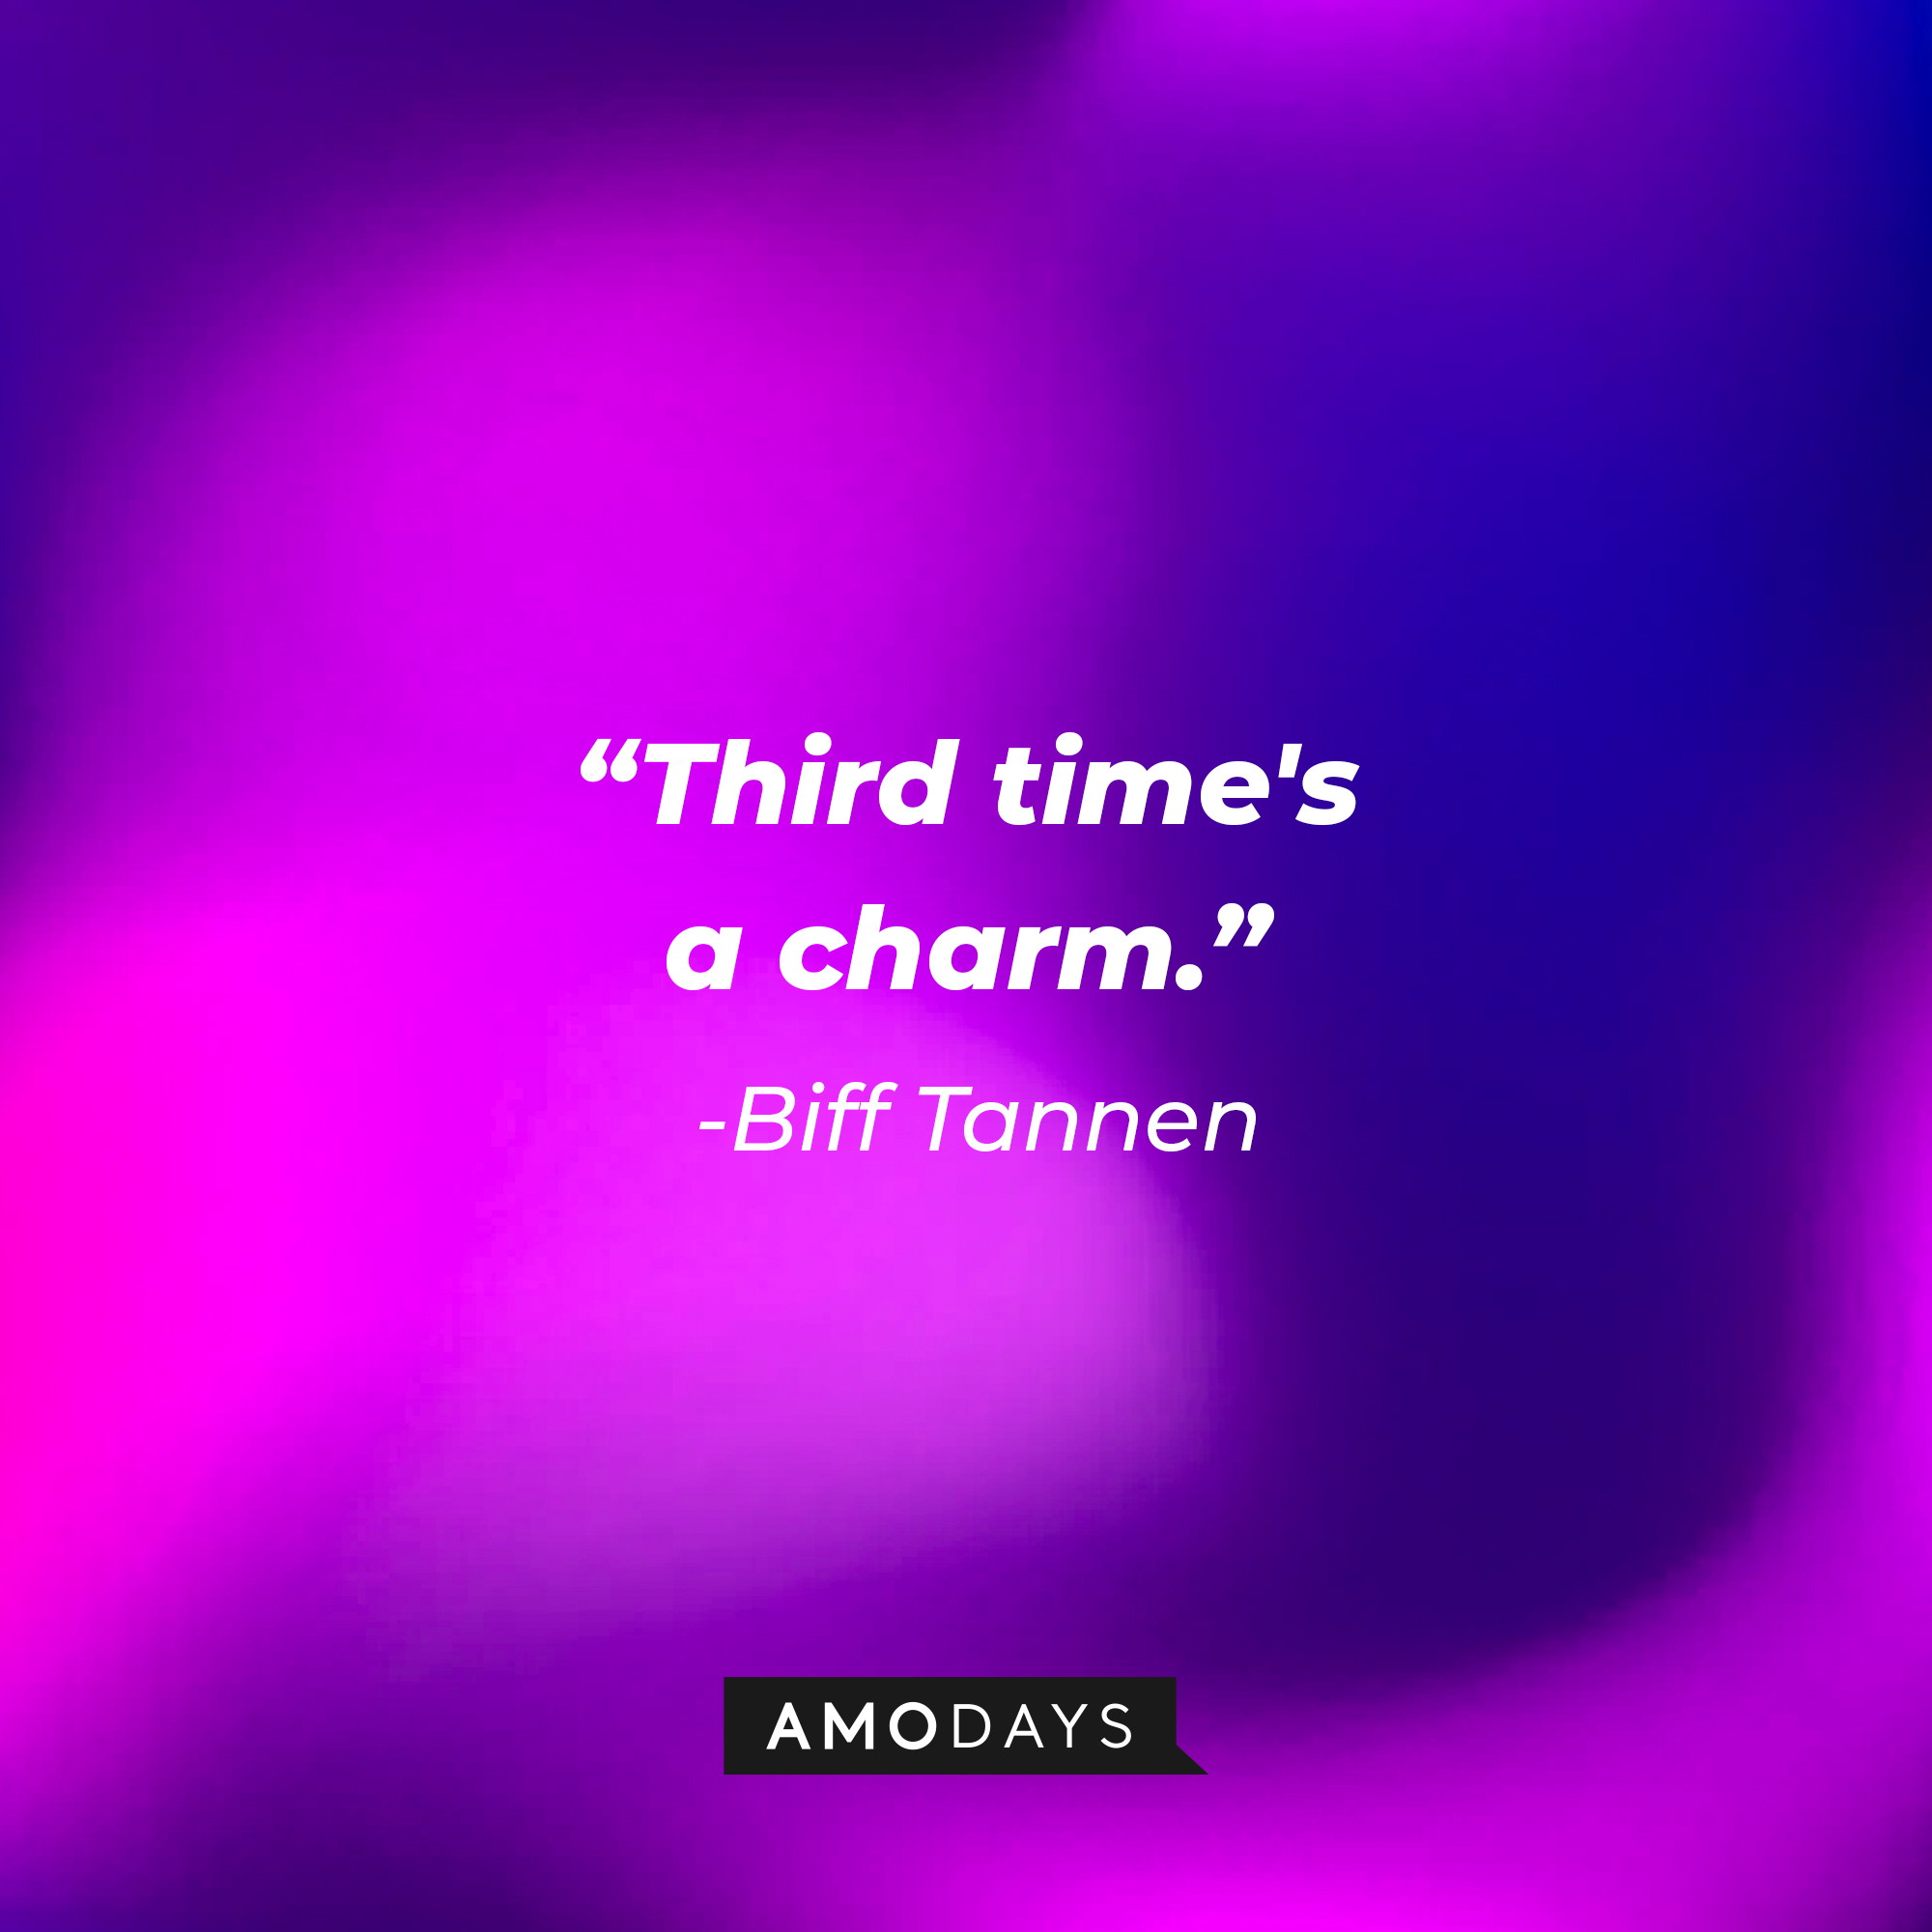 Biff Tannen’s quote: “Third time's a charm.” | Source: AmoDays